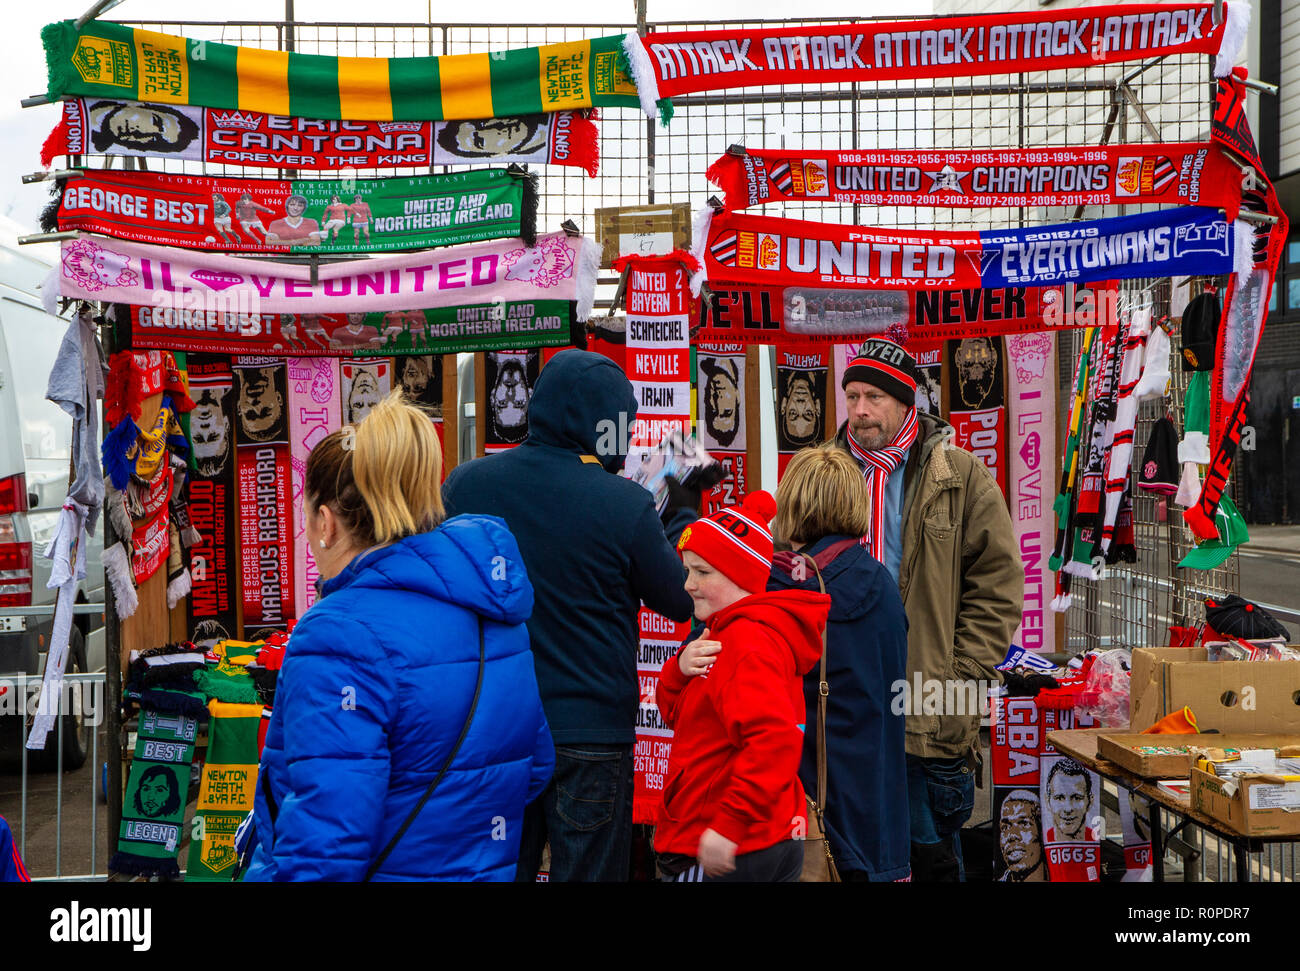 Scalf Sellers on Match Day outside Old Trafford Football Ground. Home of Manchester United Football Club. Stock Photo